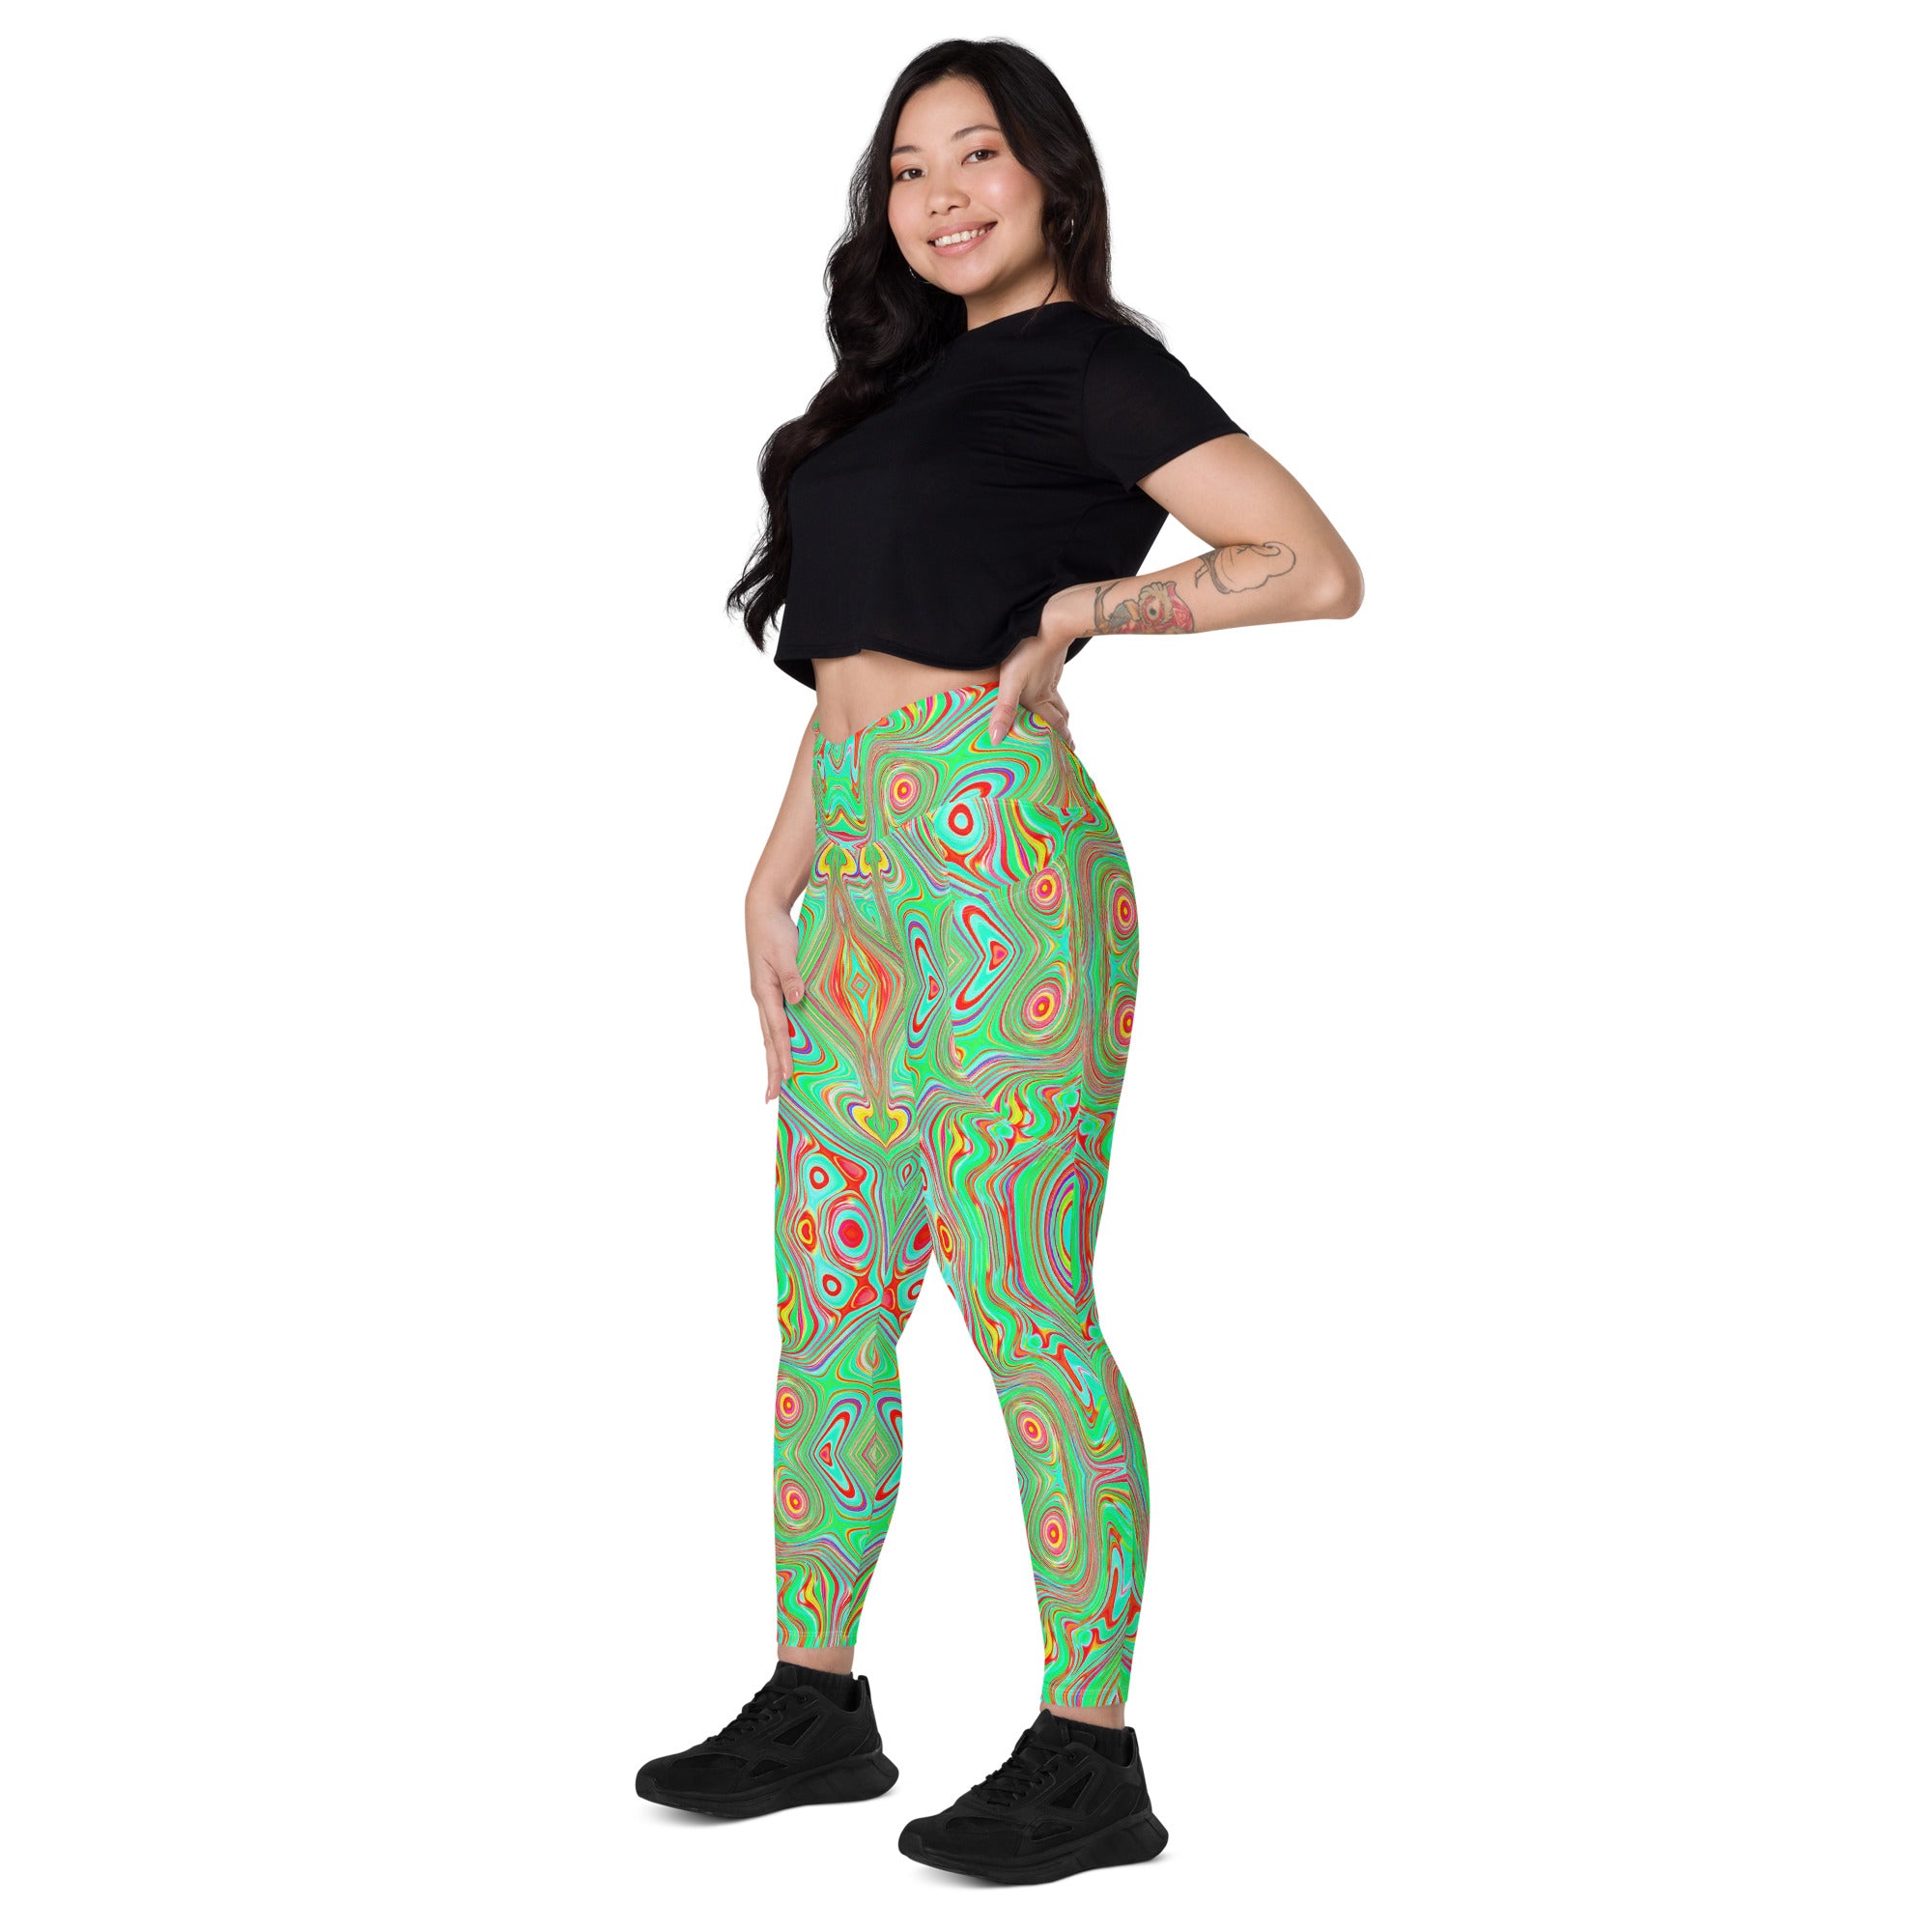 Crossover Leggings, Trippy Retro Orange and Lime Green Abstract Pattern